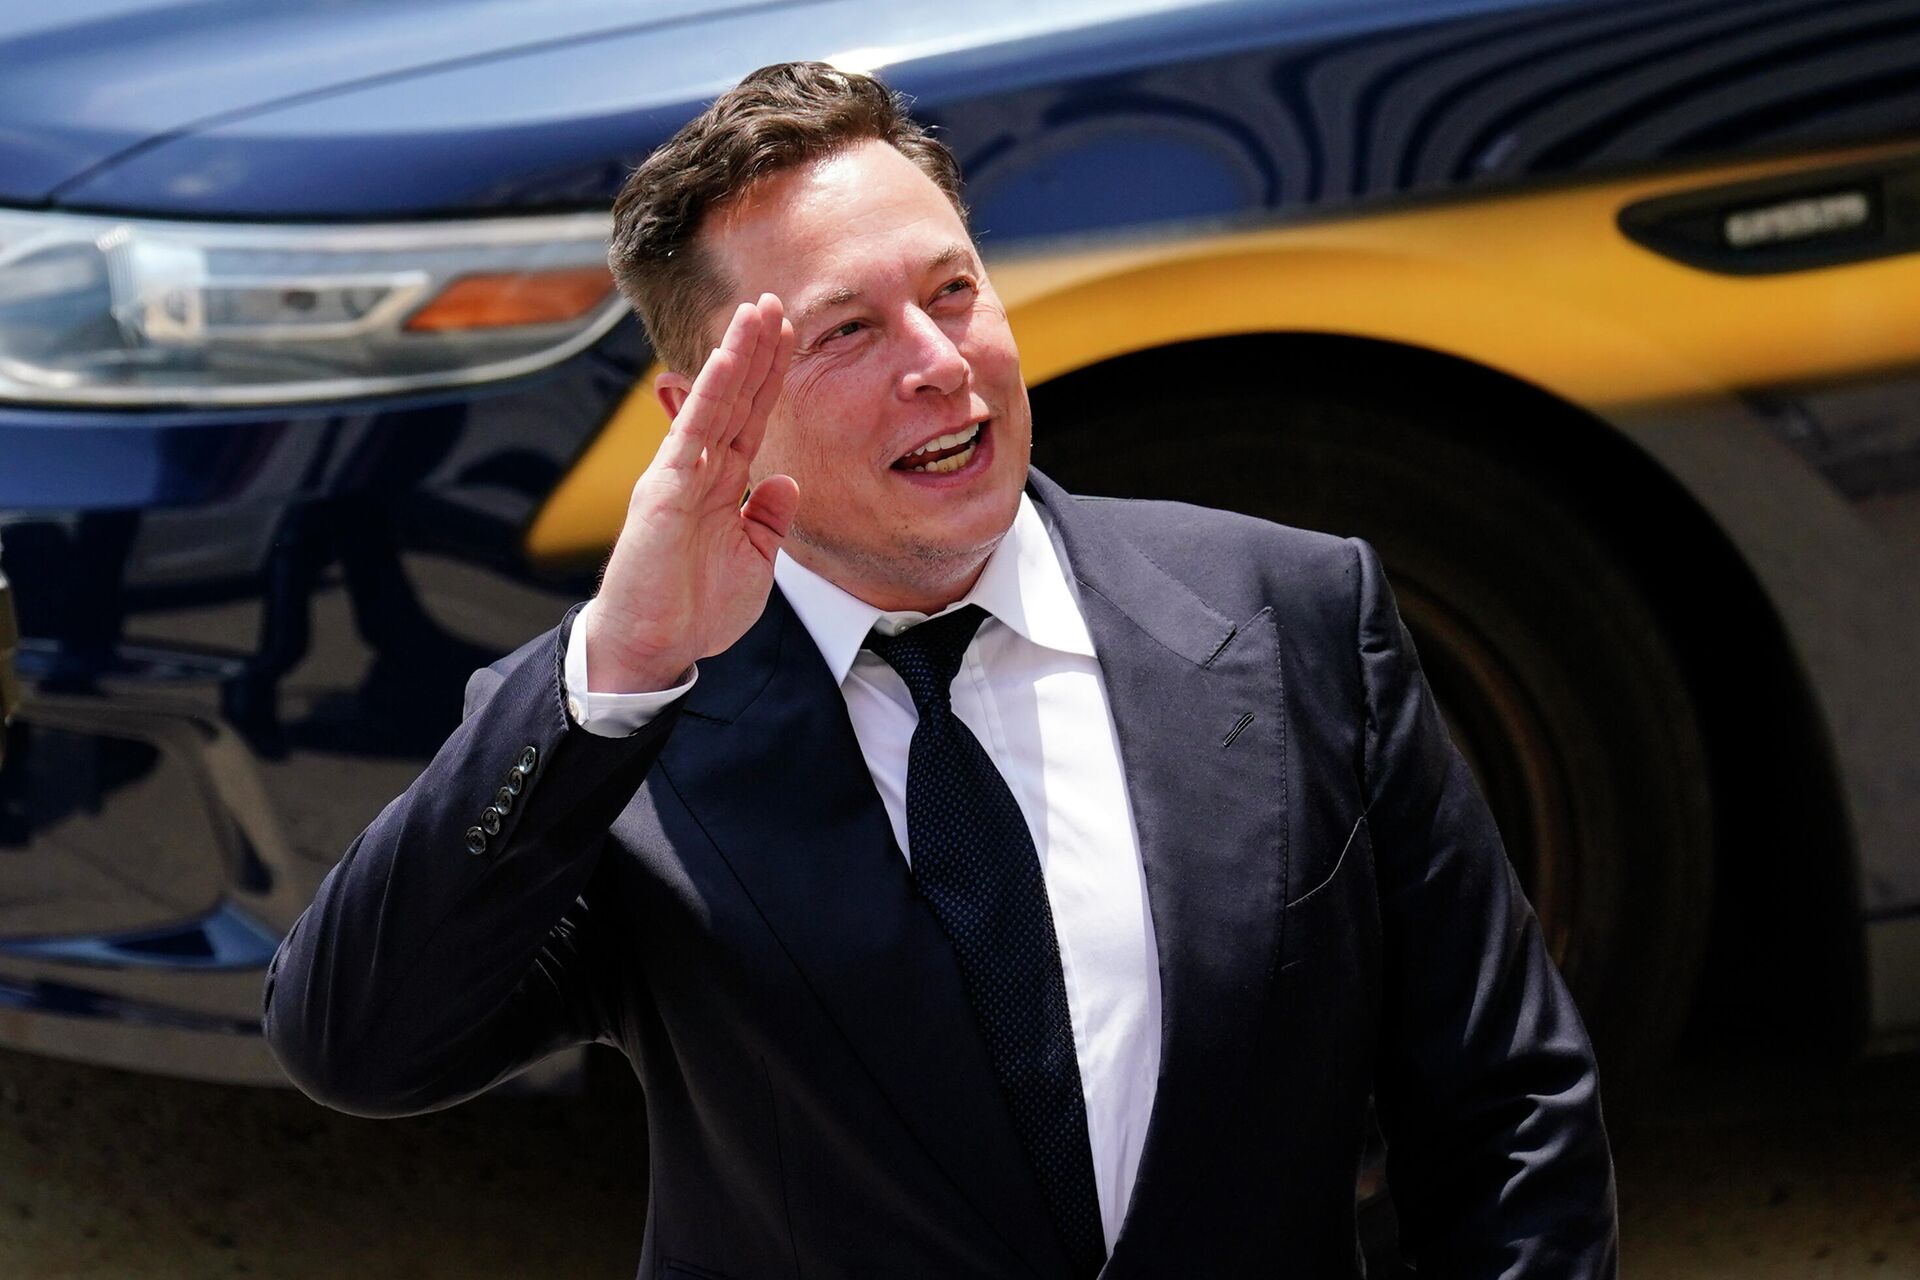 CEO Elon Musk departs from the justice center in Wilmington, Del., Tuesday, July 13, 2021. Testifying for a second day, Musk pushed back again Tuesday against a lawsuit that blames him for engineering Tesla’s 2016 acquisition of a financially precarious company called SolarCity that was marred by conflicts of interest and never generated the profits Musk insisted it would. - Sputnik International, 1920, 05.04.2022